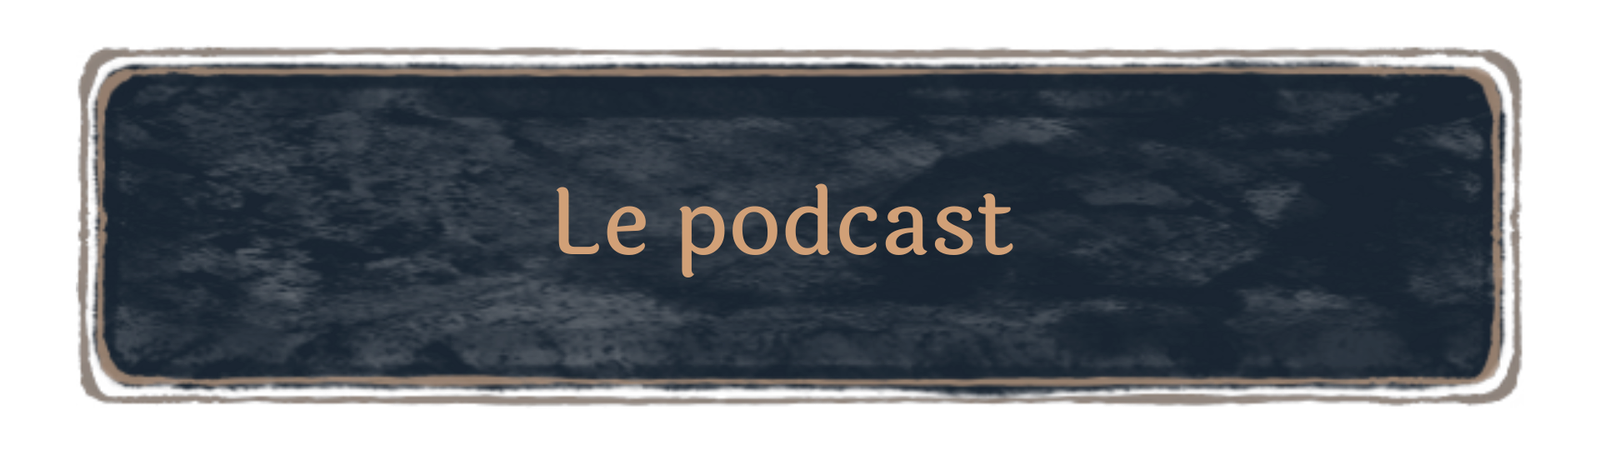 bouton vers le podcast